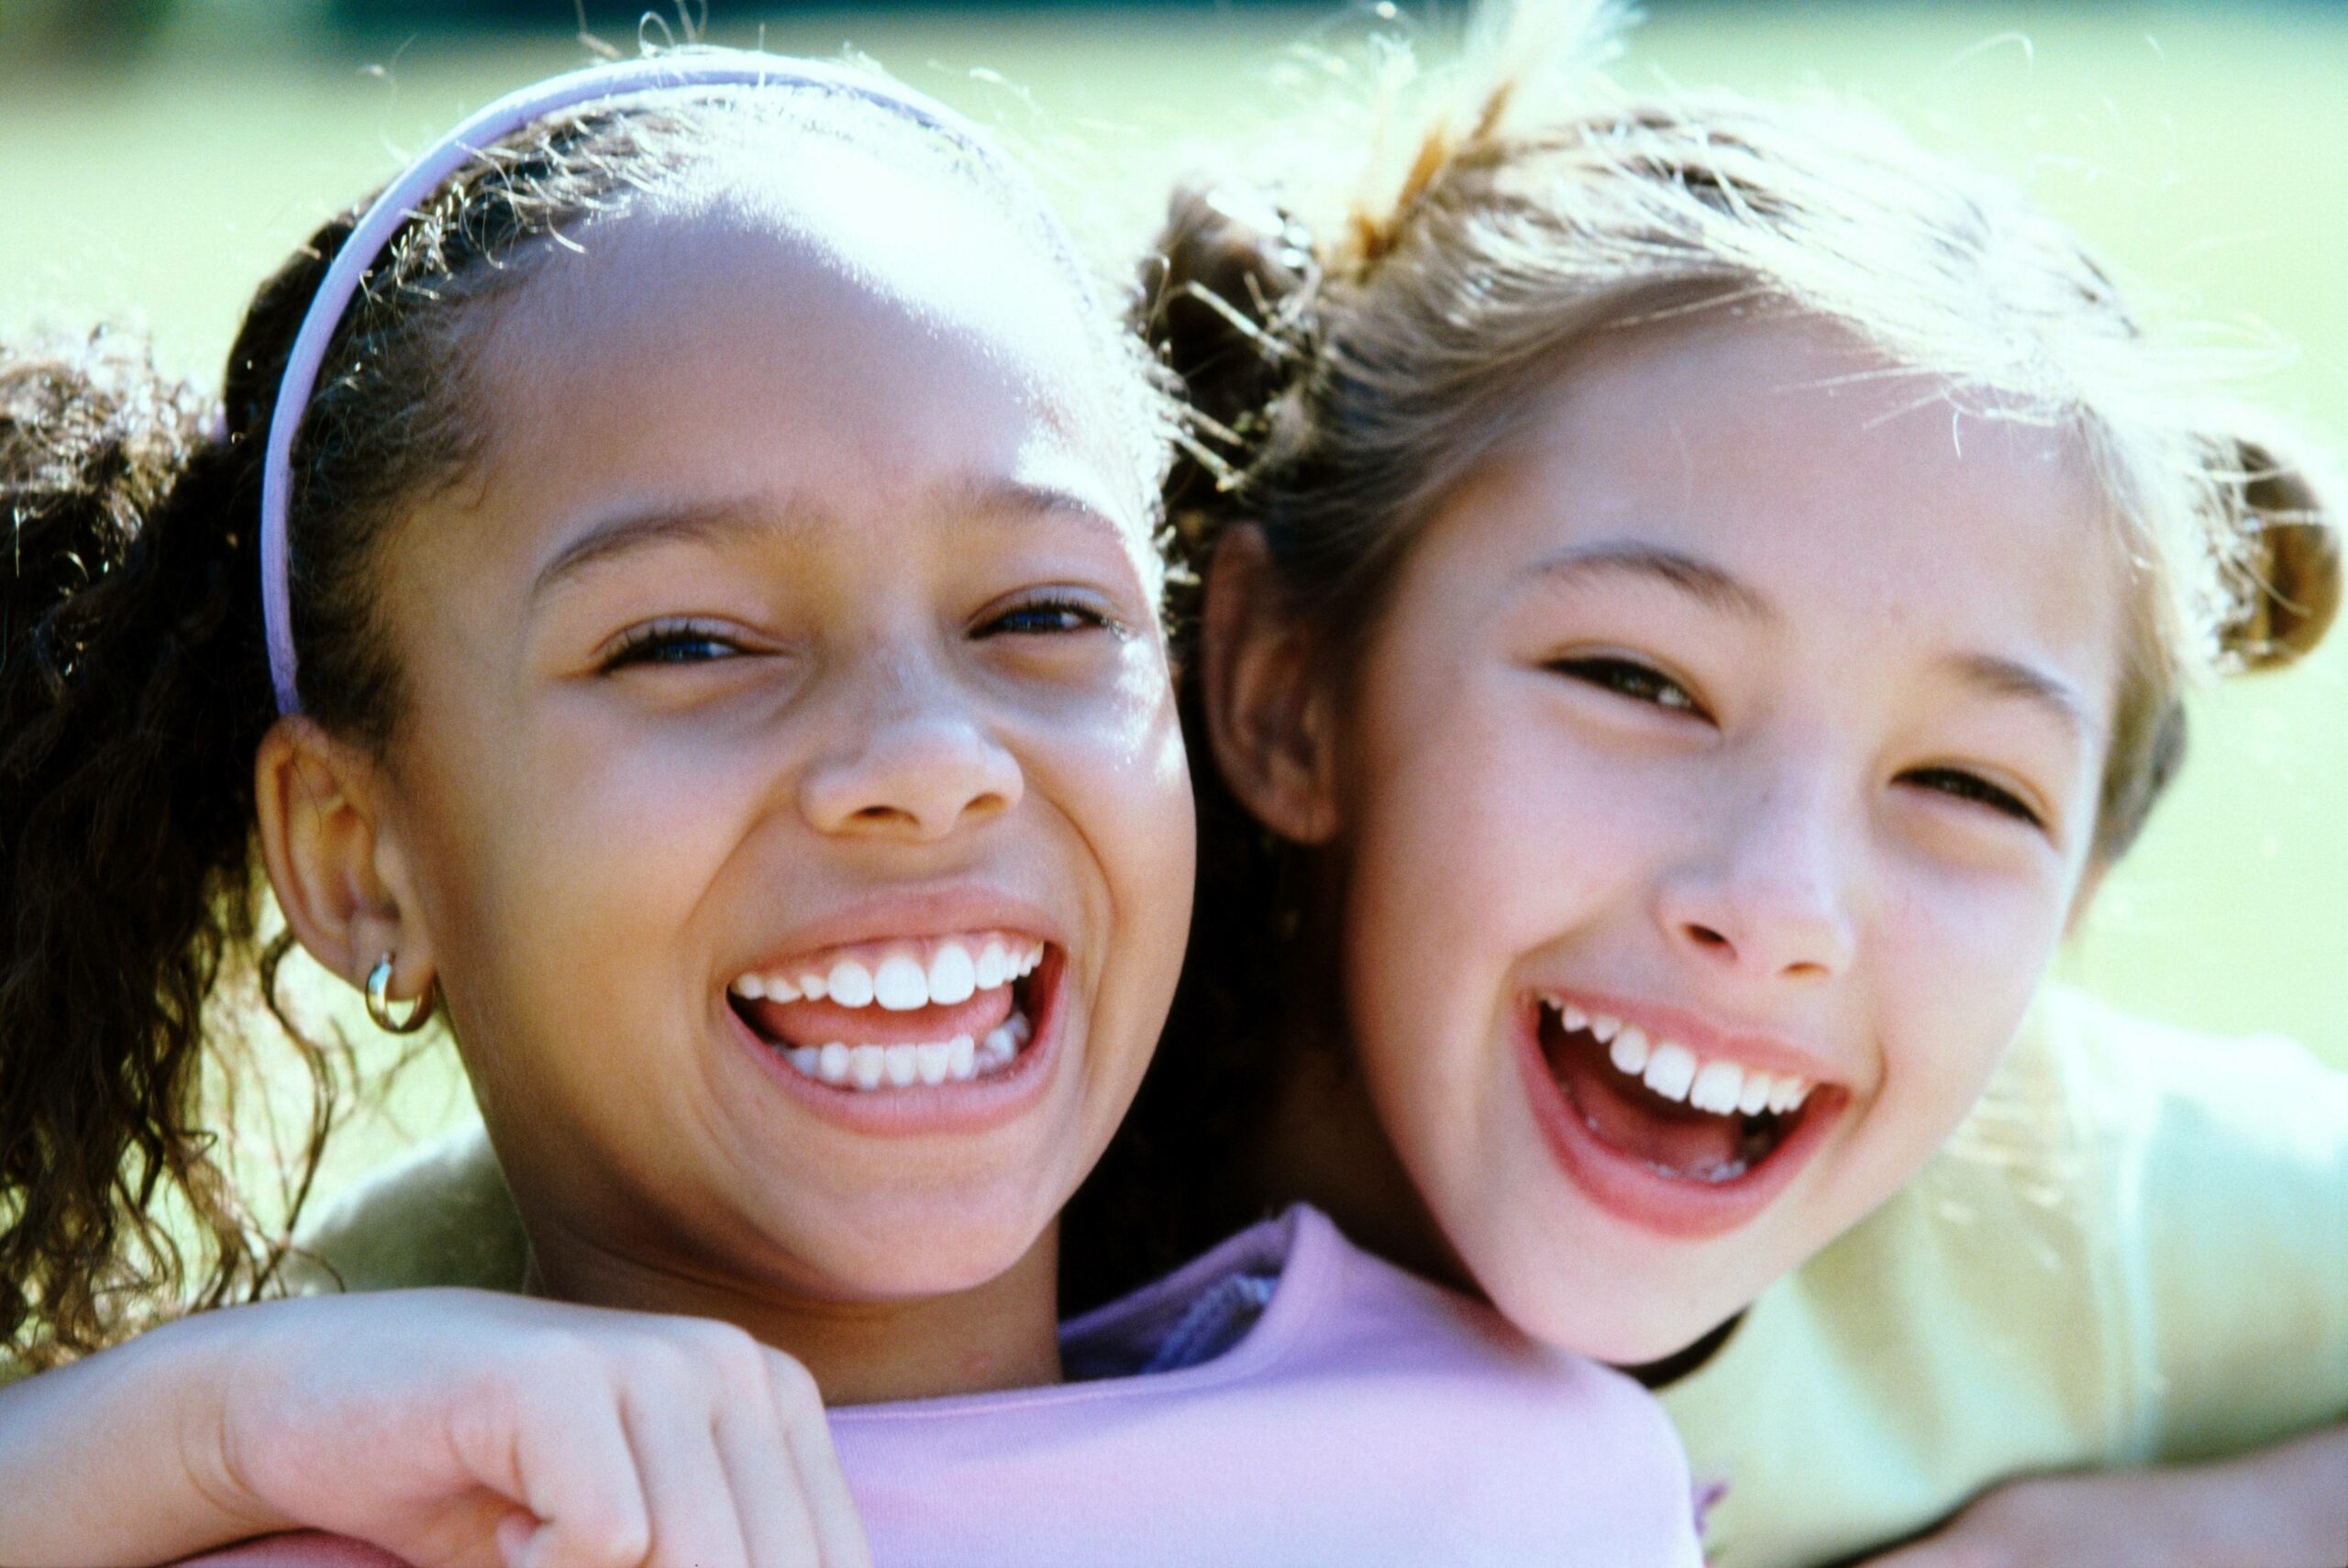 two young girls laughing and smiling